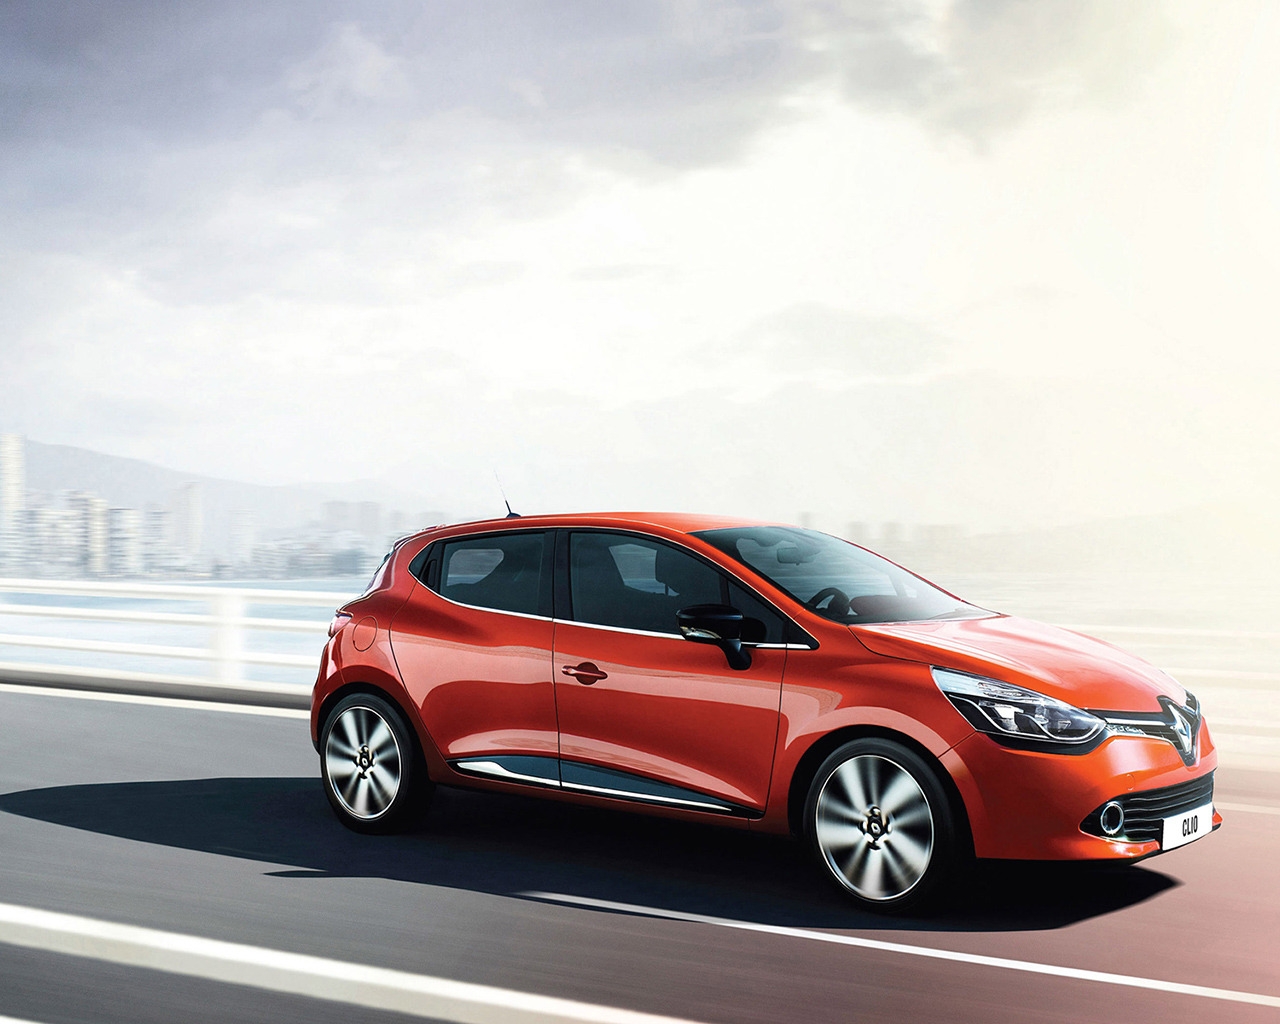 2013 Renault Clio for 1280 x 1024 resolution